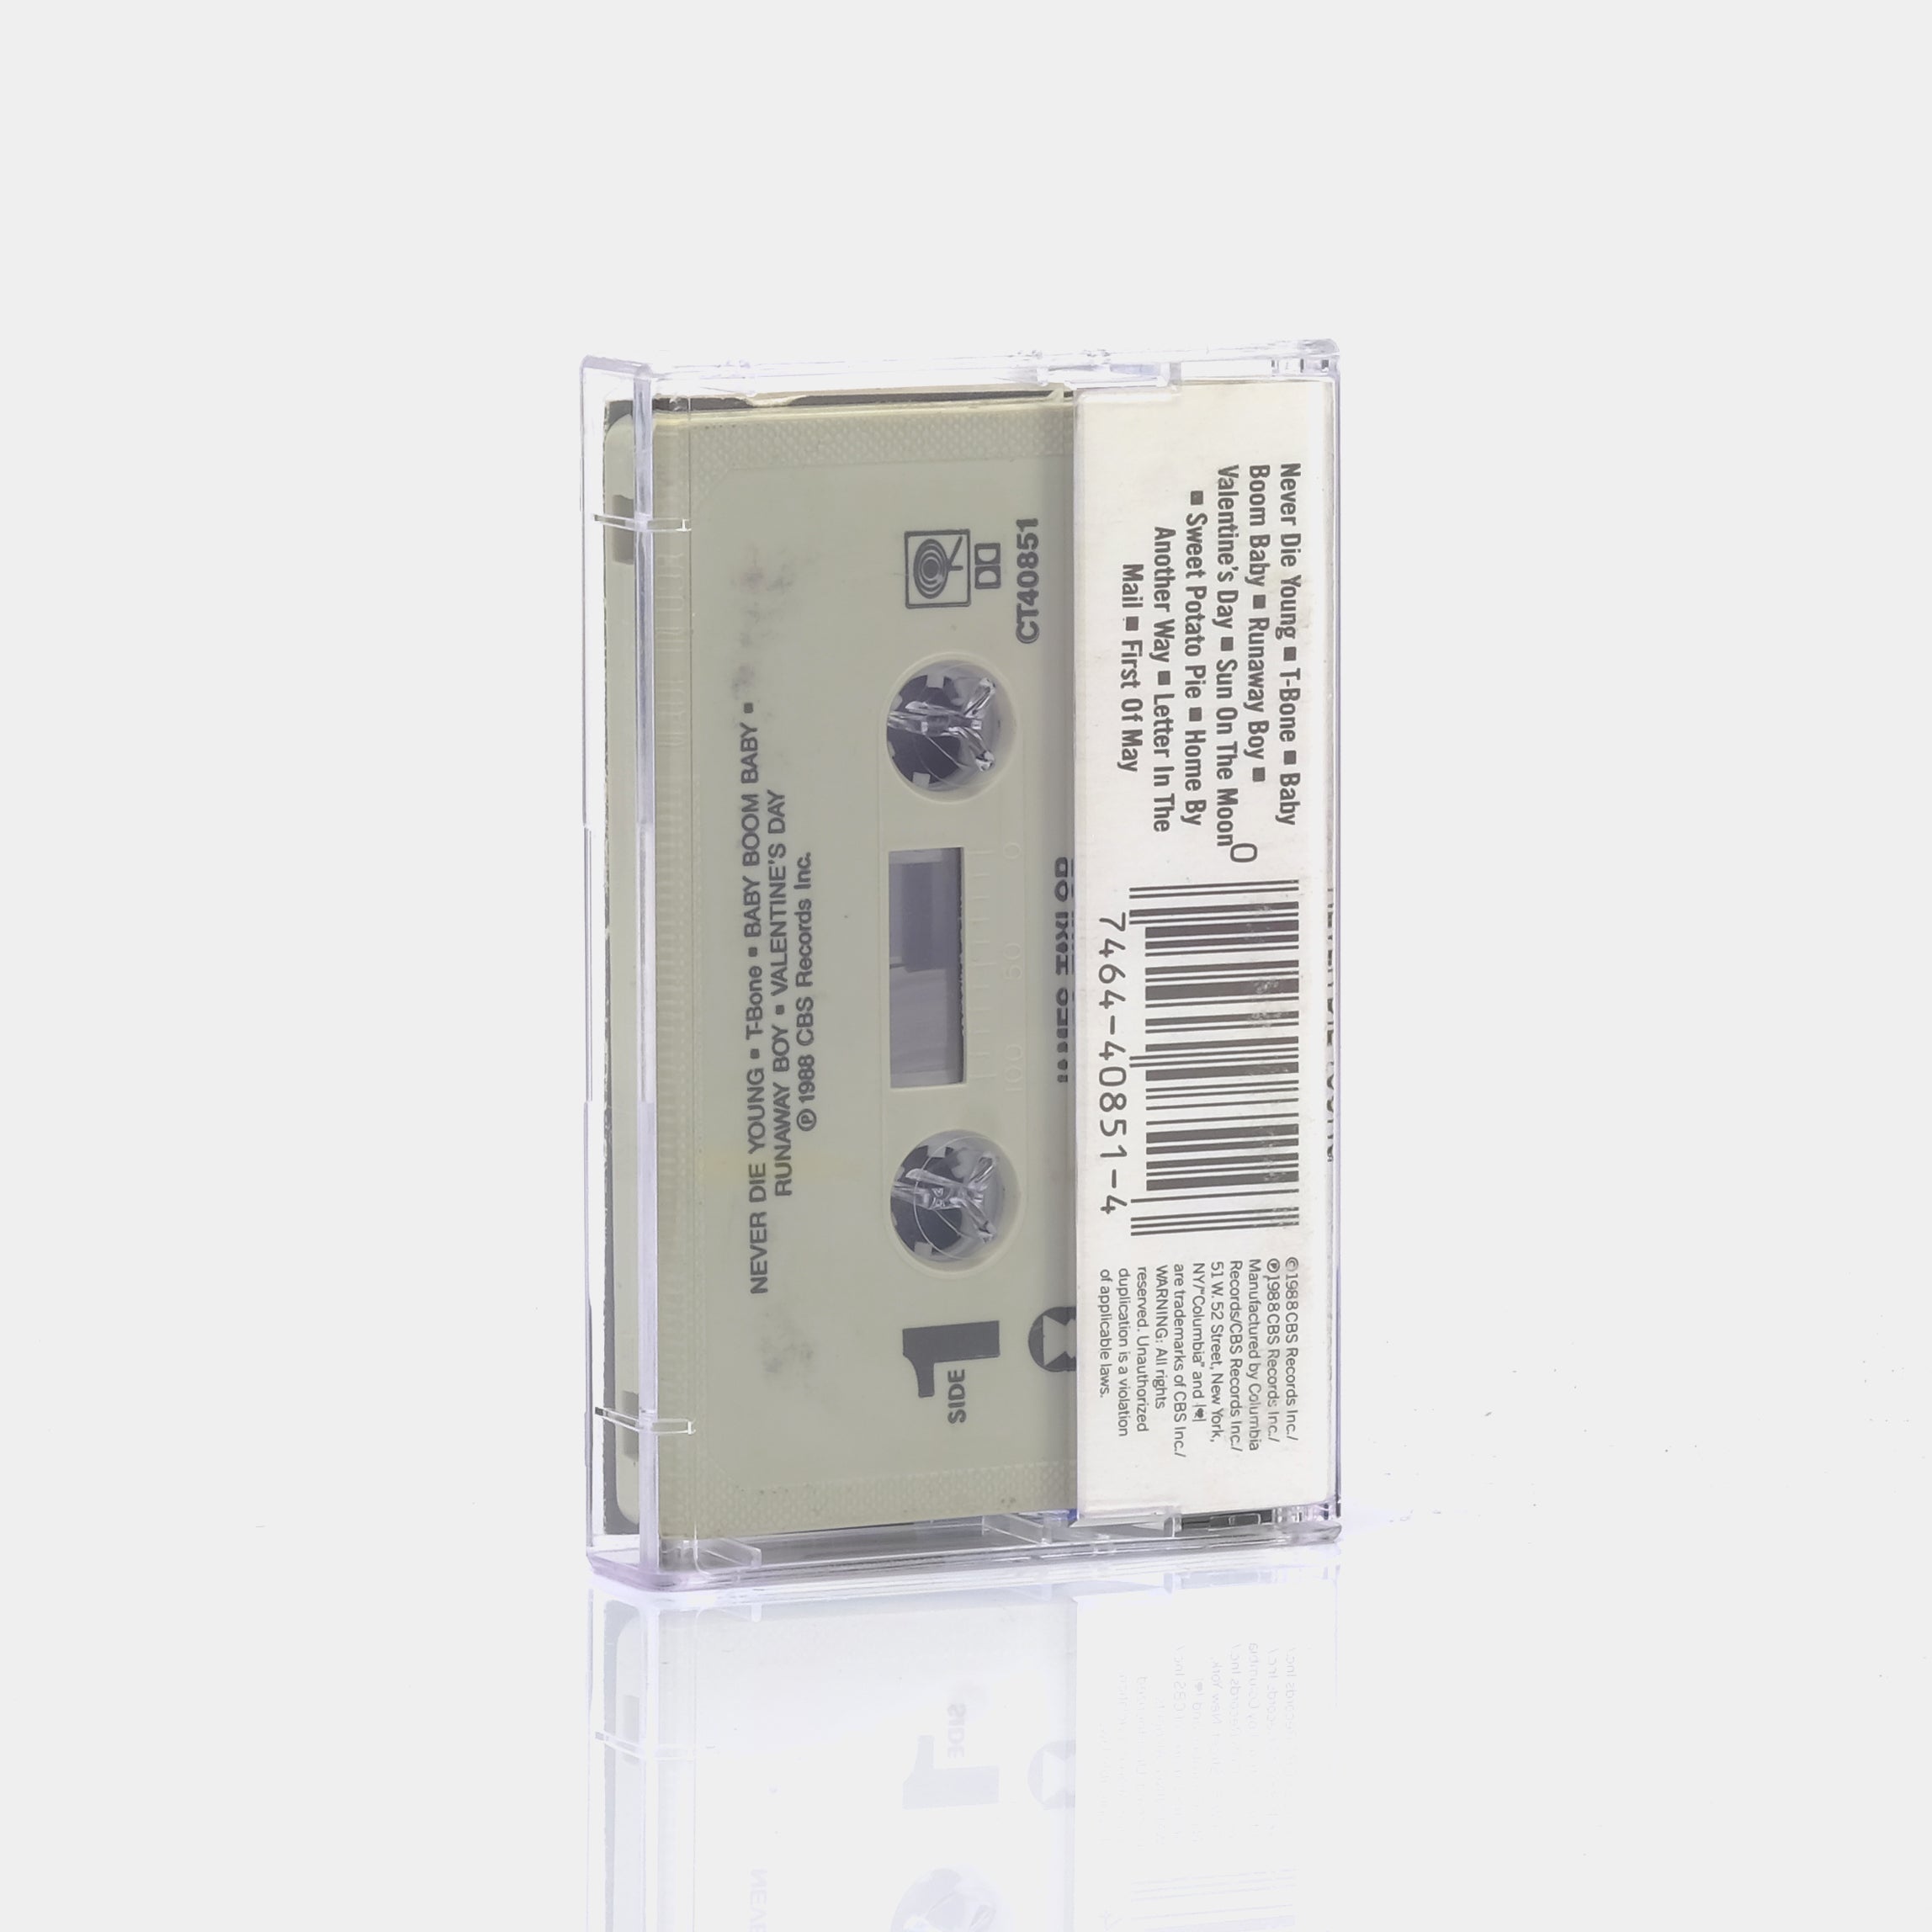 James Taylor - Never Die Young Cassette Tape